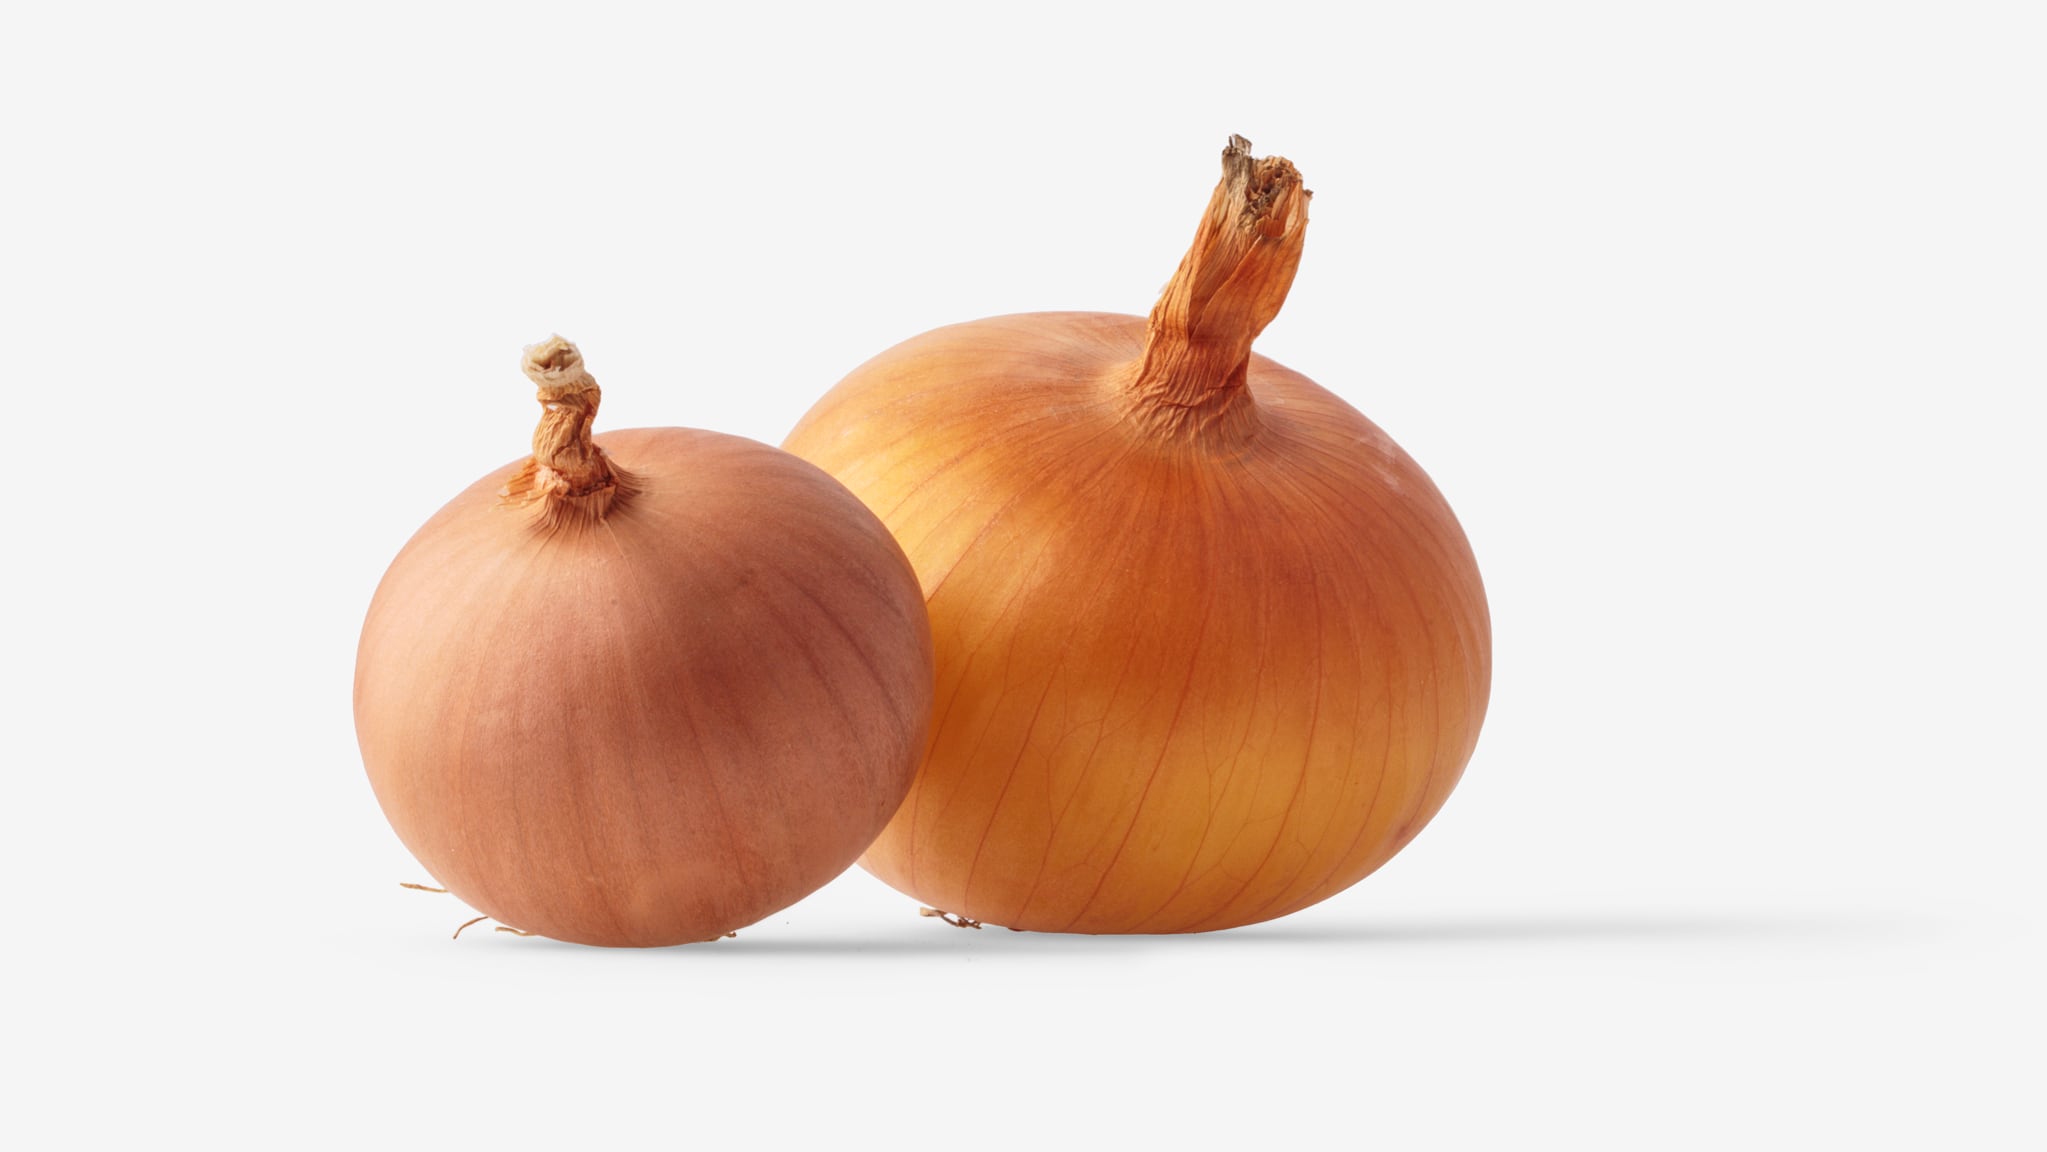 Onion image asset with transparent background